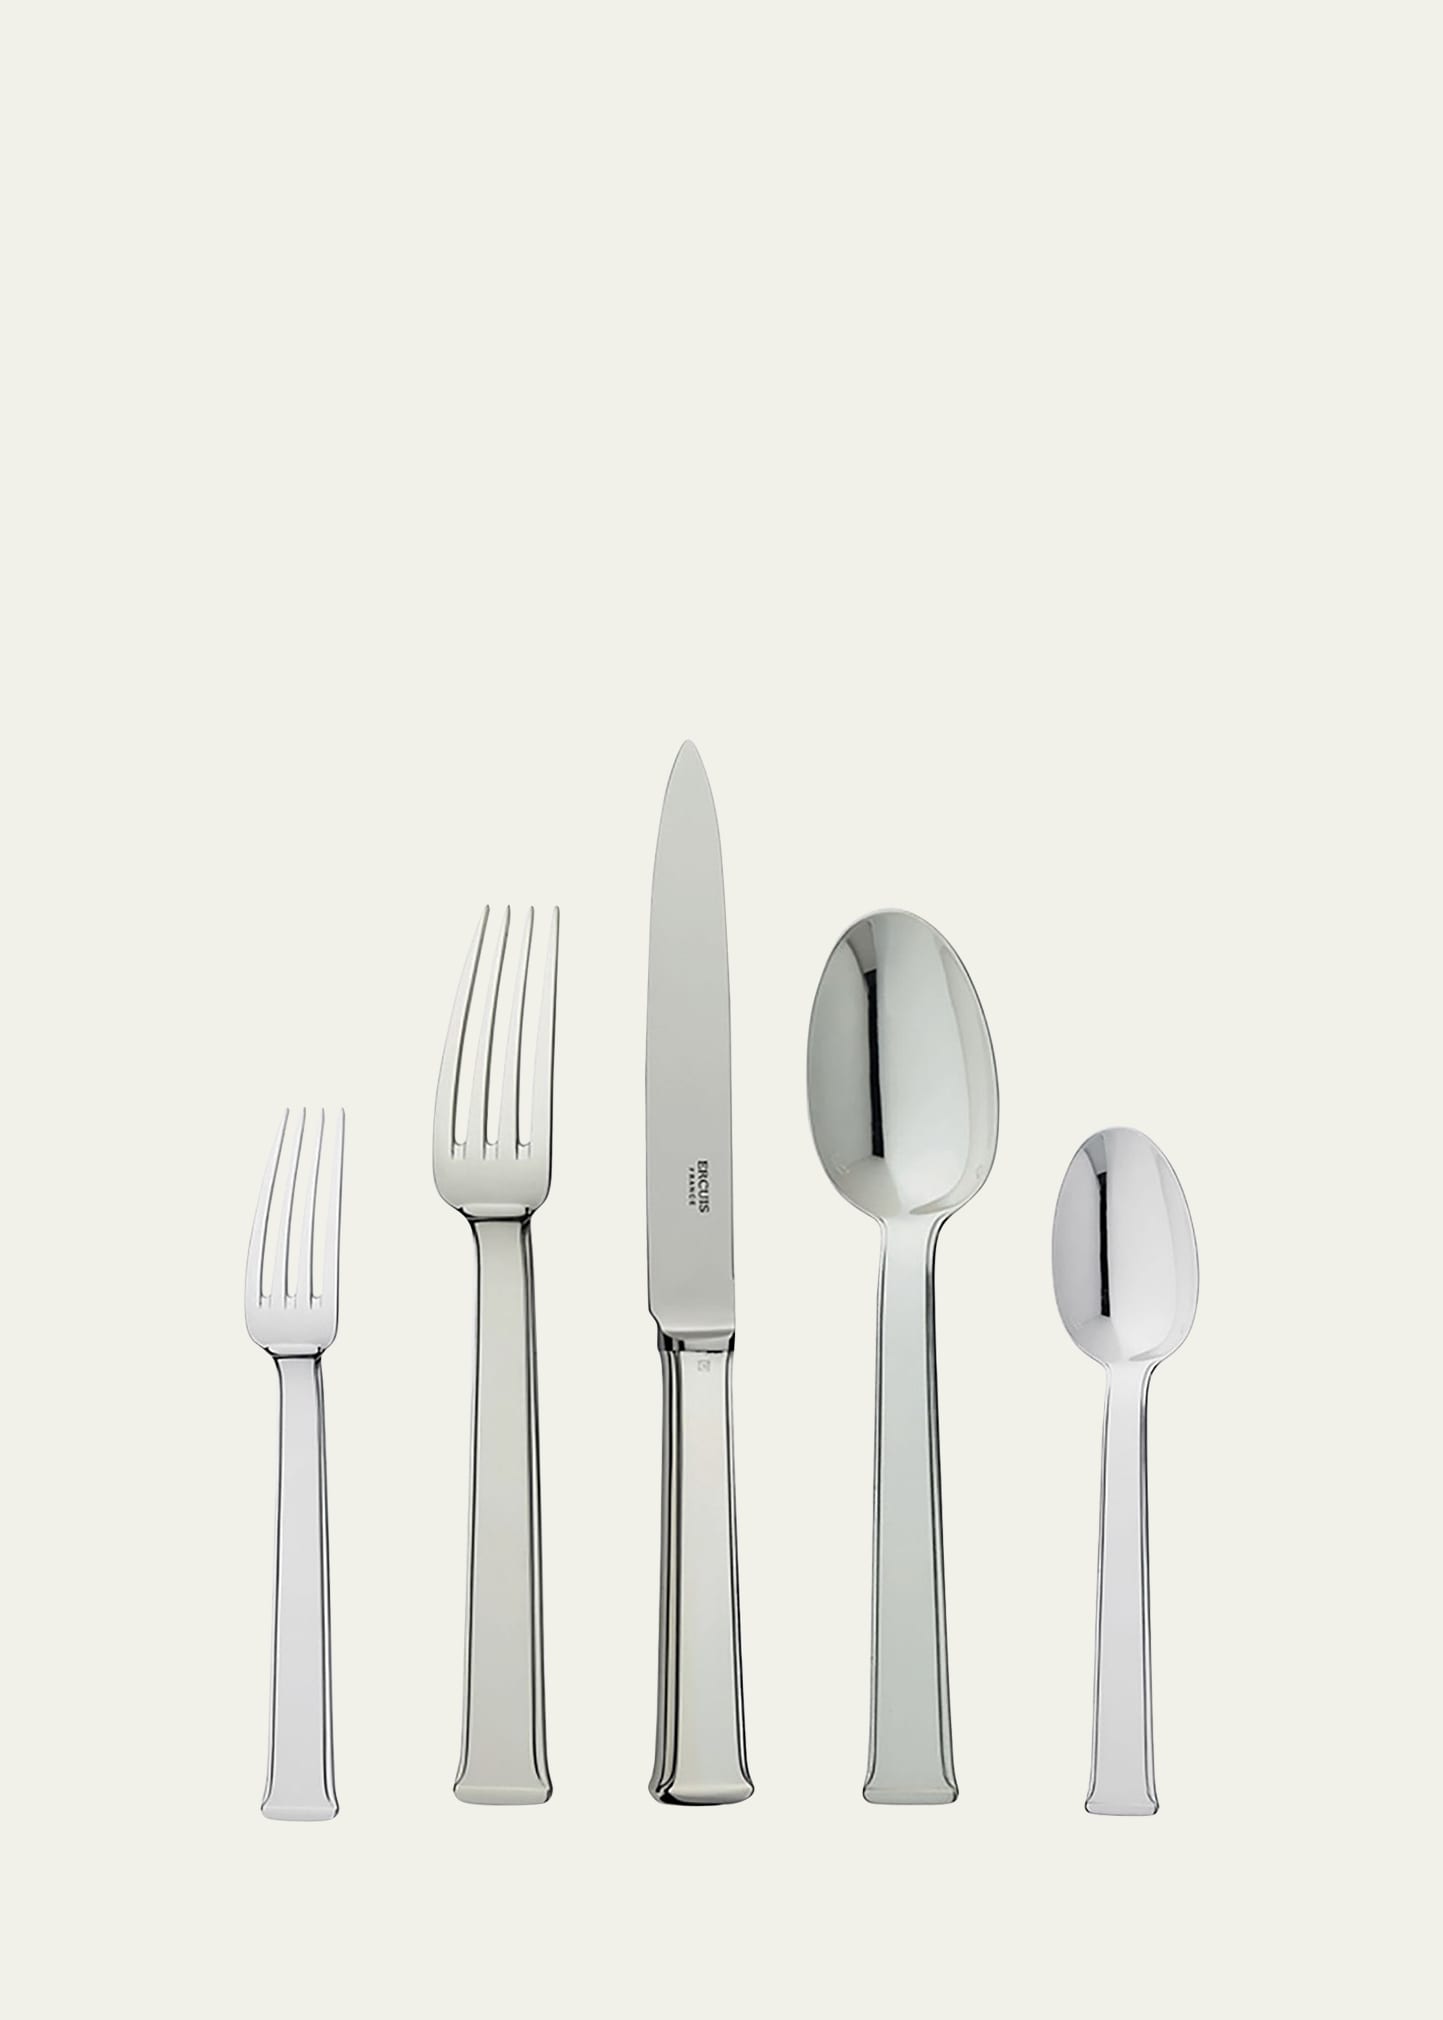 Sequoia Silver Plated 5-Piece Flatware Place Setting